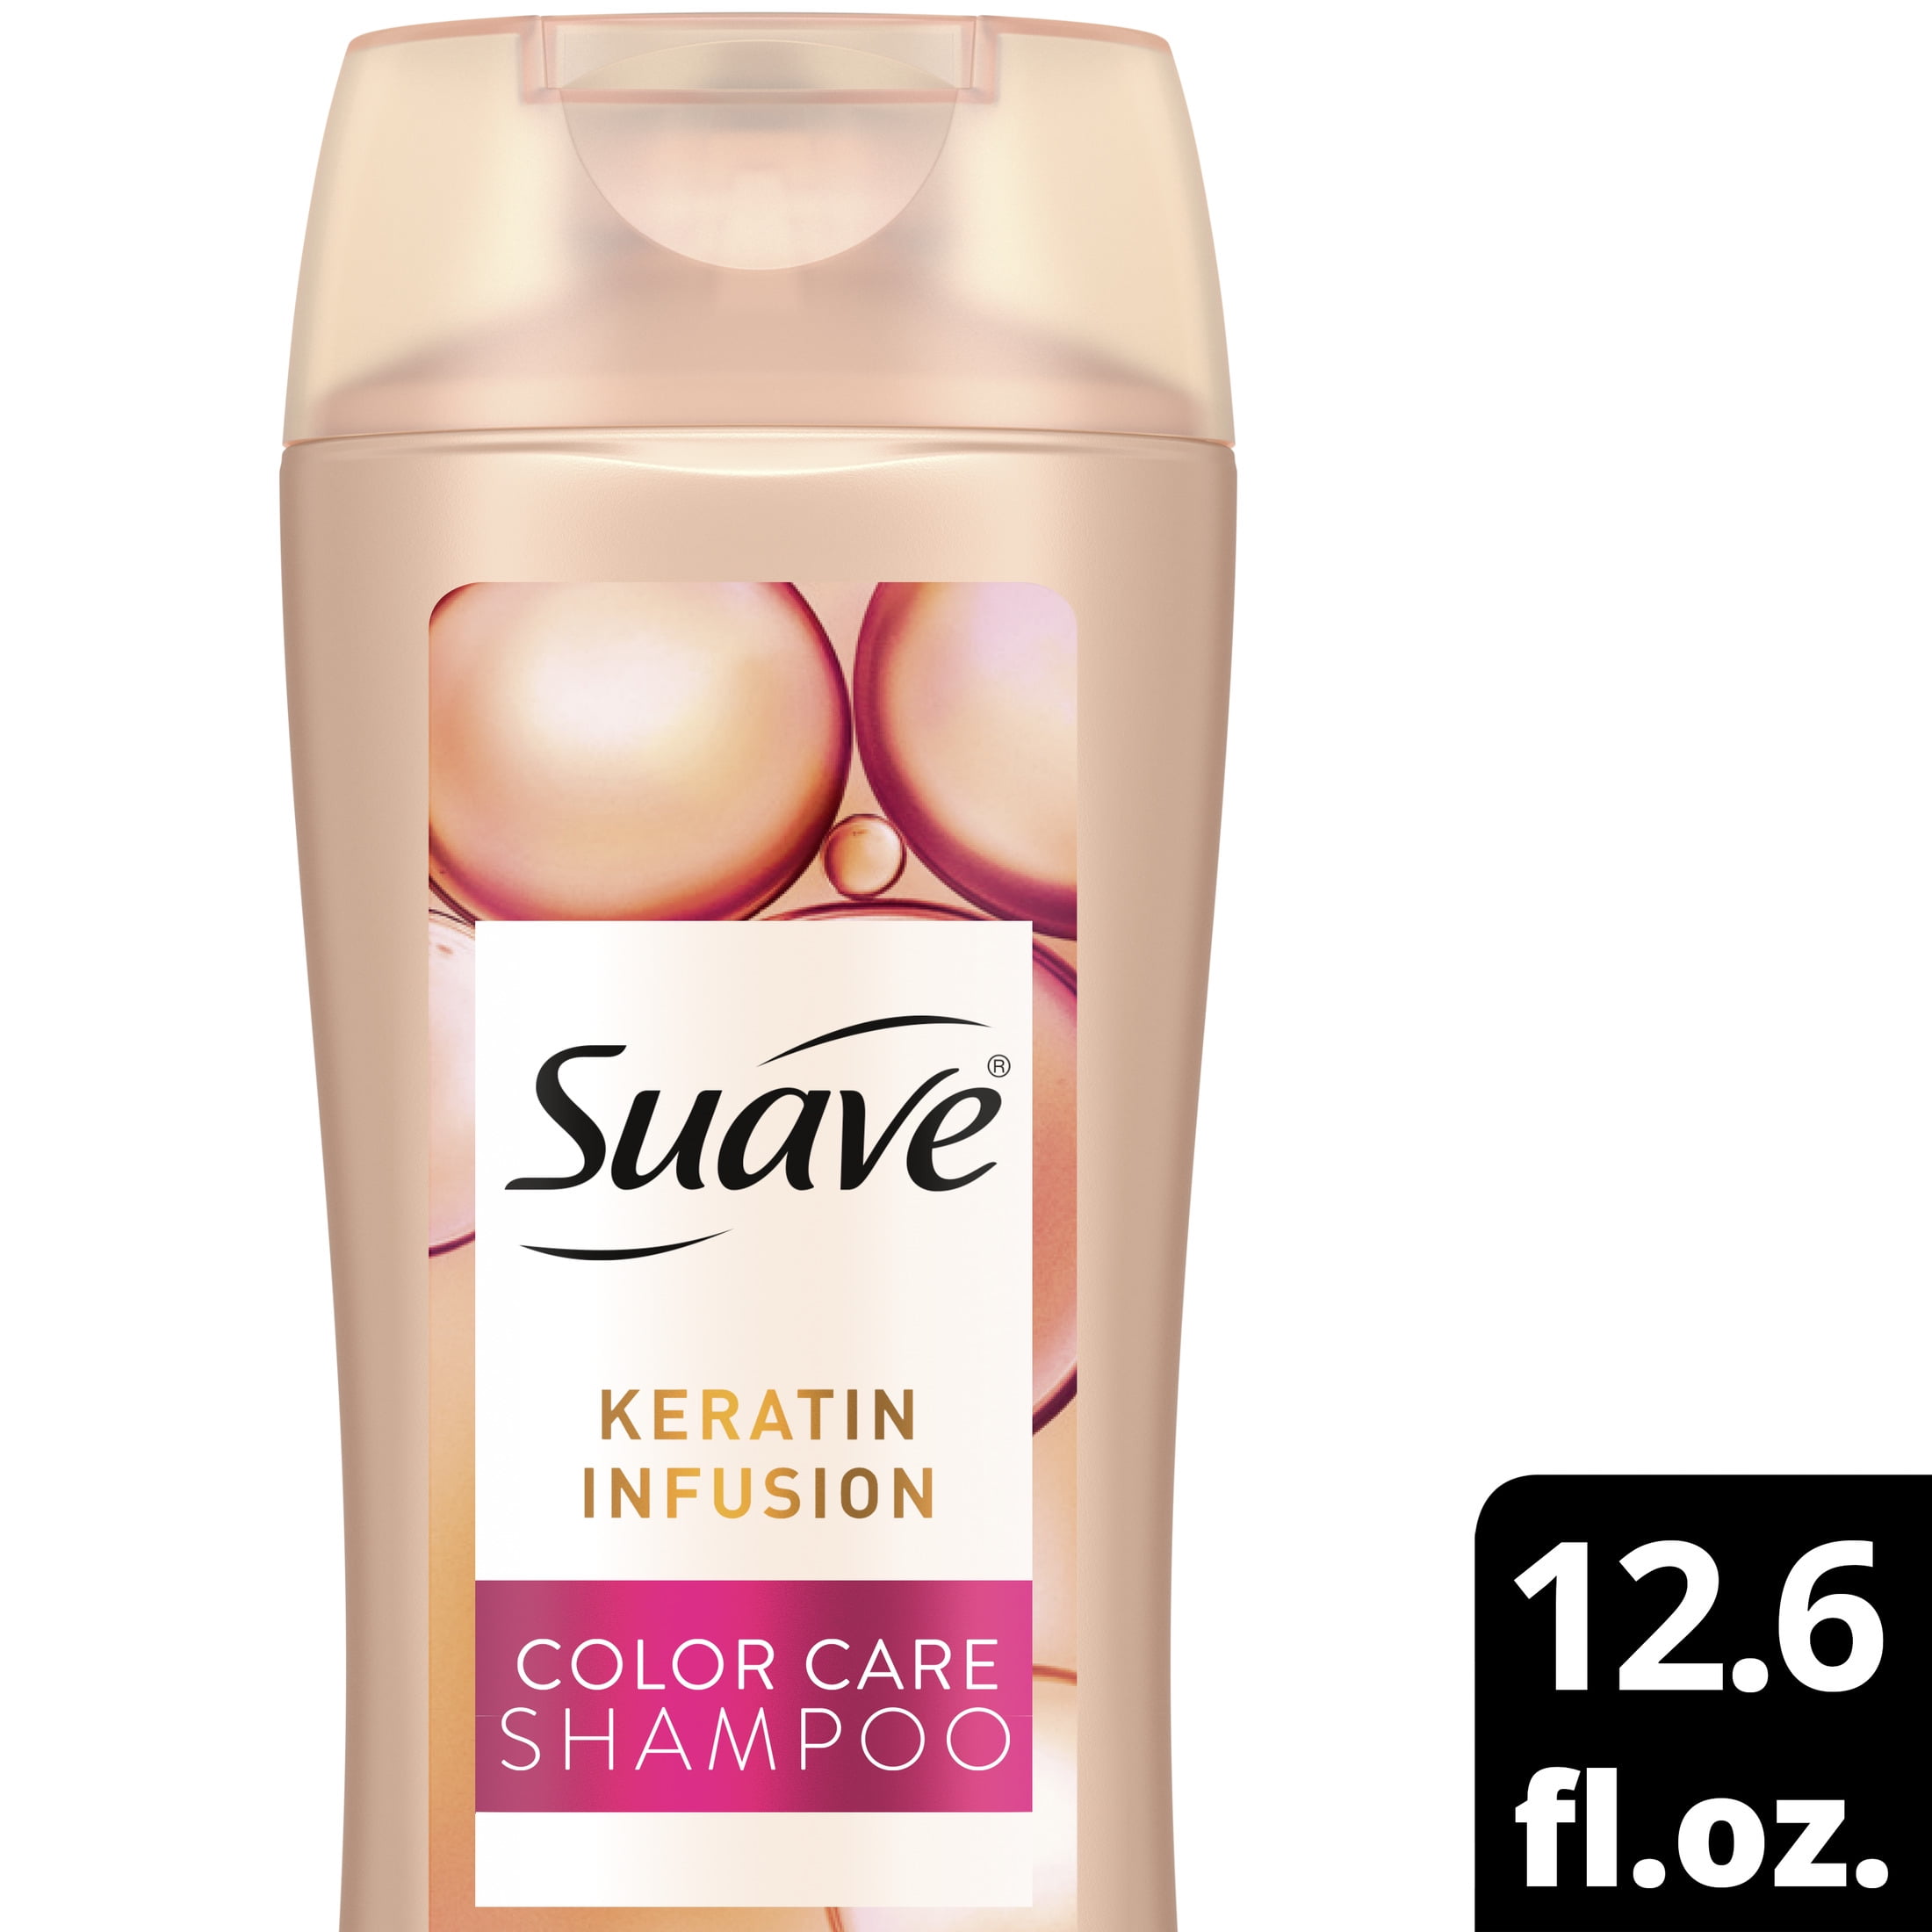 Suave Keratin Infusion Color Care Shampoo for Color-Treated Hair and Frizzy hair 12.6 fl oz